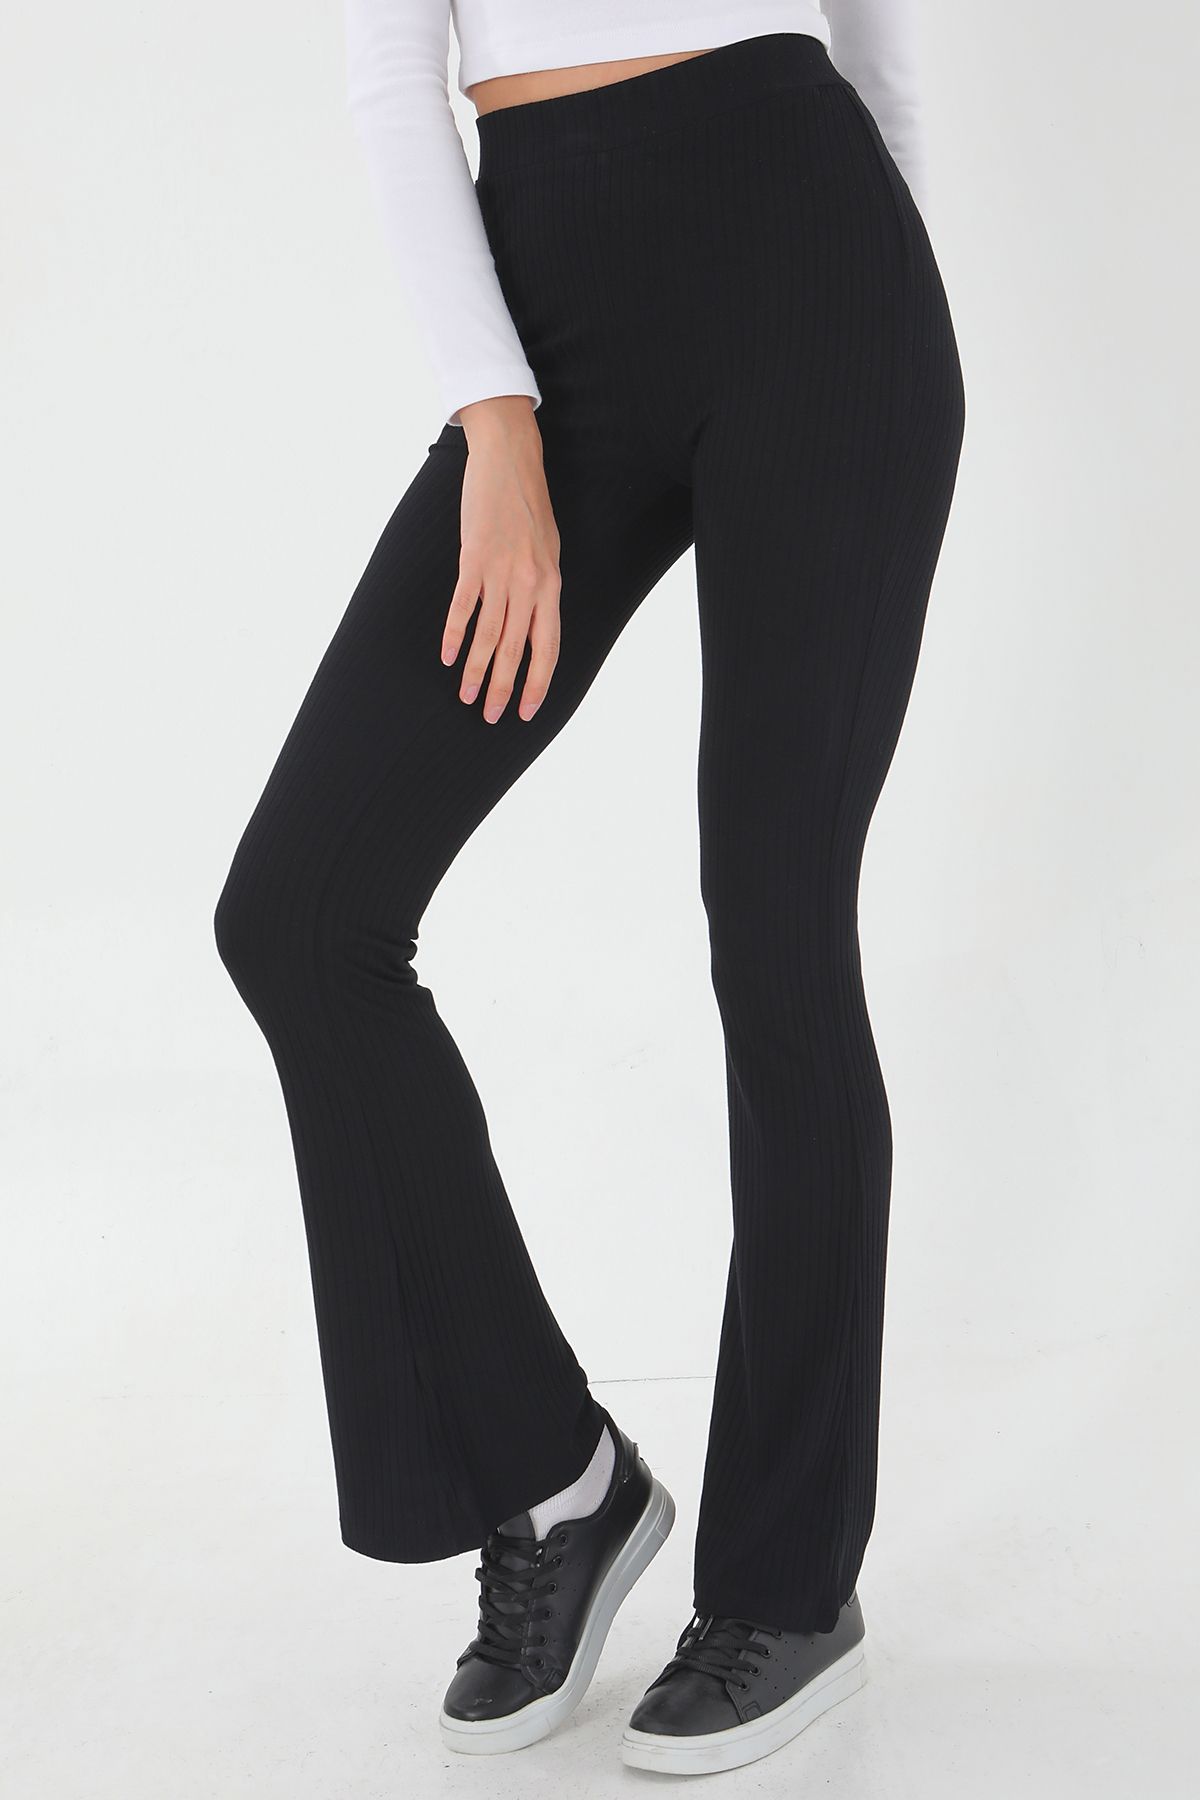 Ribbed Stretchable Flared Pants for Women(Pack of 2)